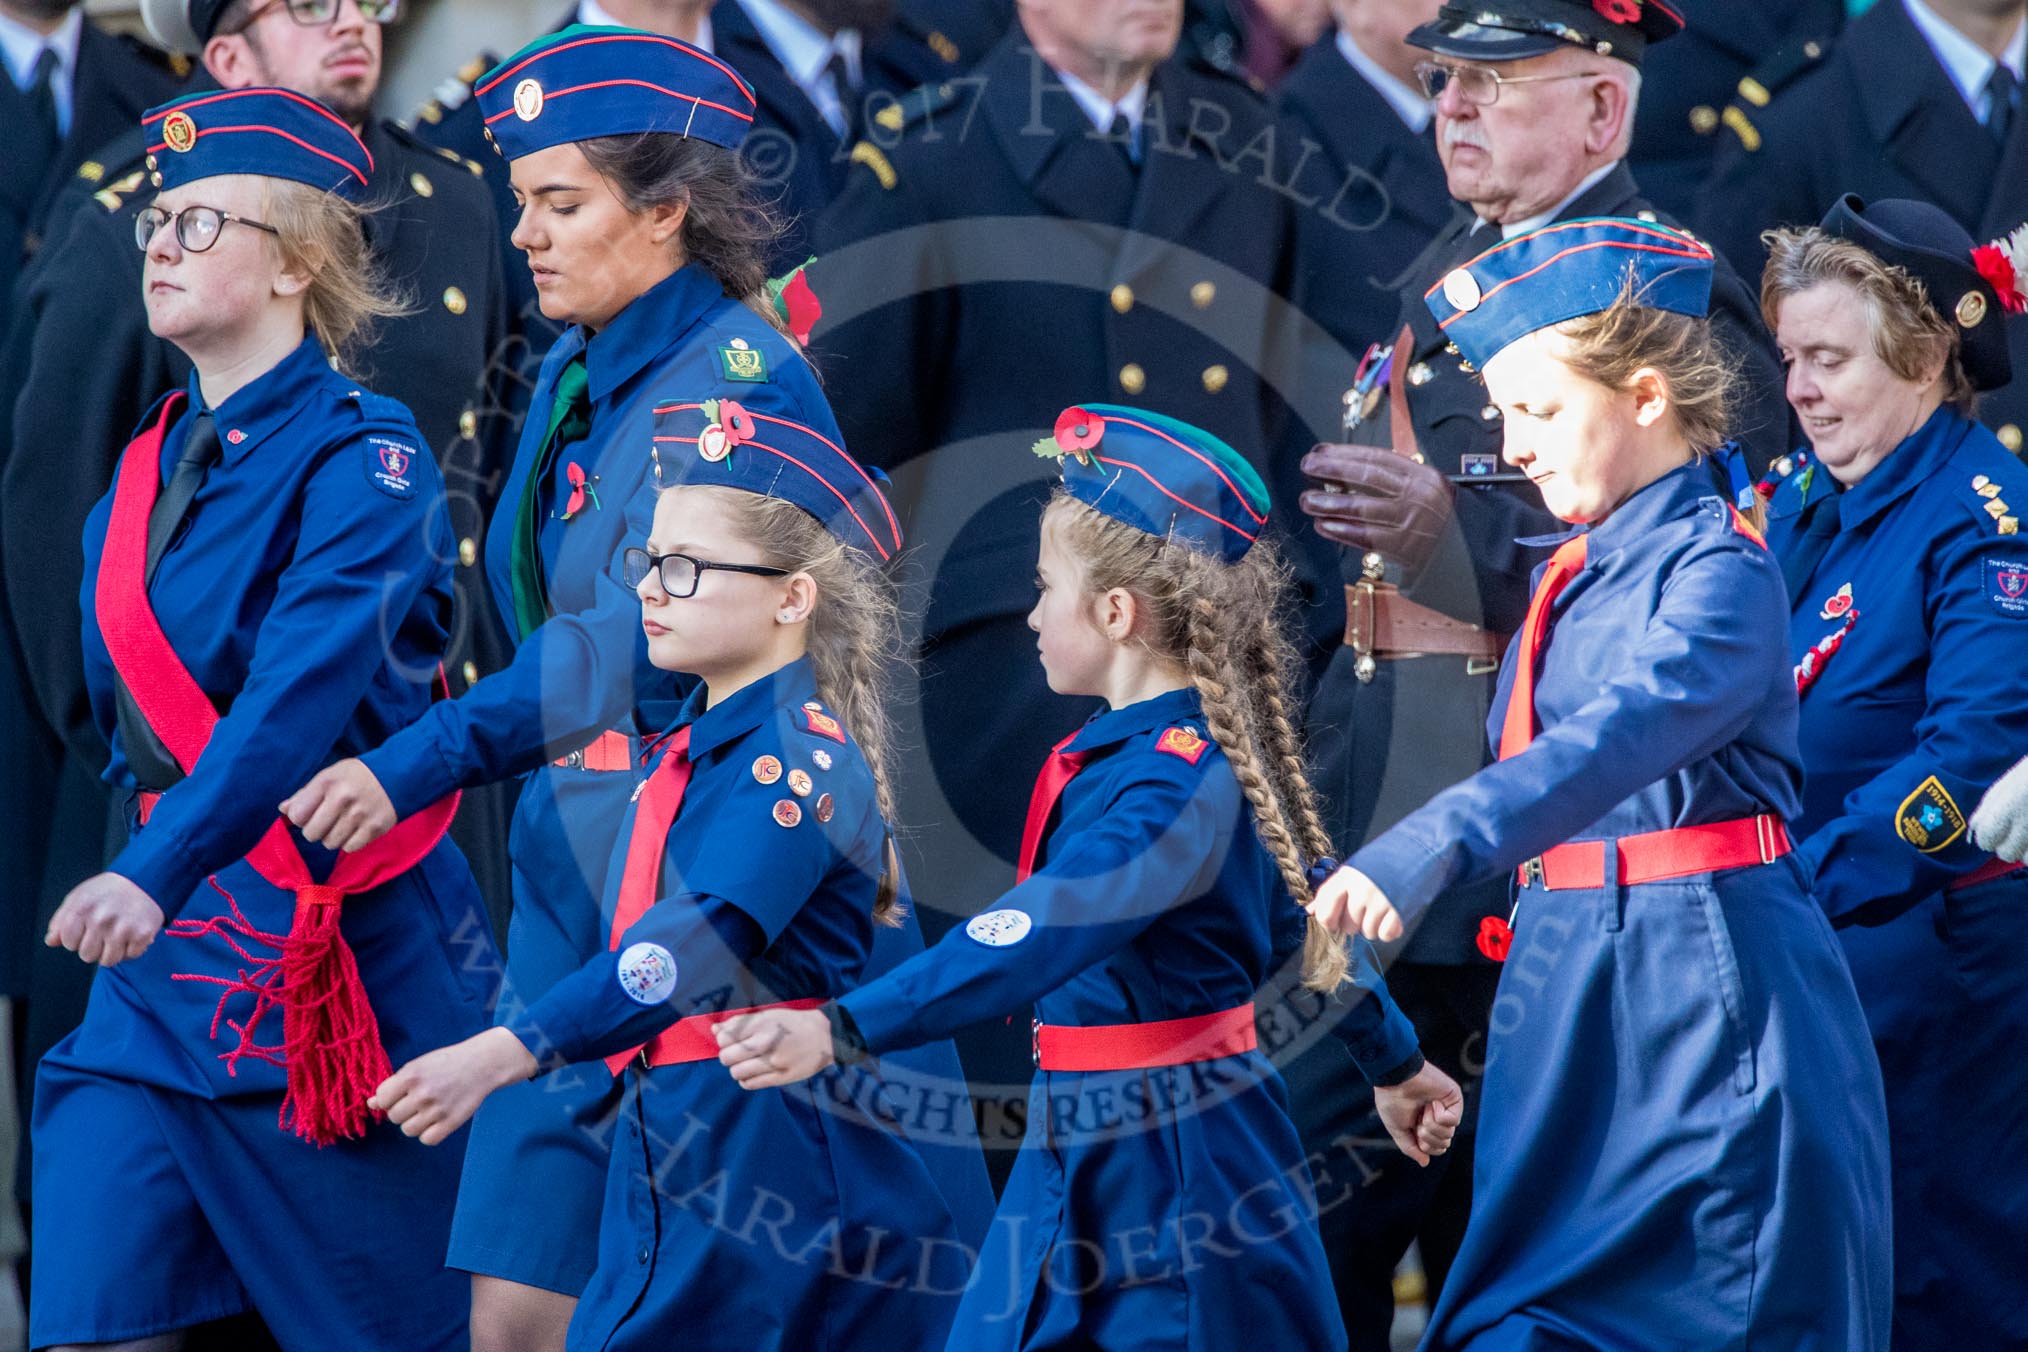 Church Lads' and Church Girls' Brigade (Group M41, 25 members) during the Royal British Legion March Past on Remembrance Sunday at the Cenotaph, Whitehall, Westminster, London, 11 November 2018, 12:30.